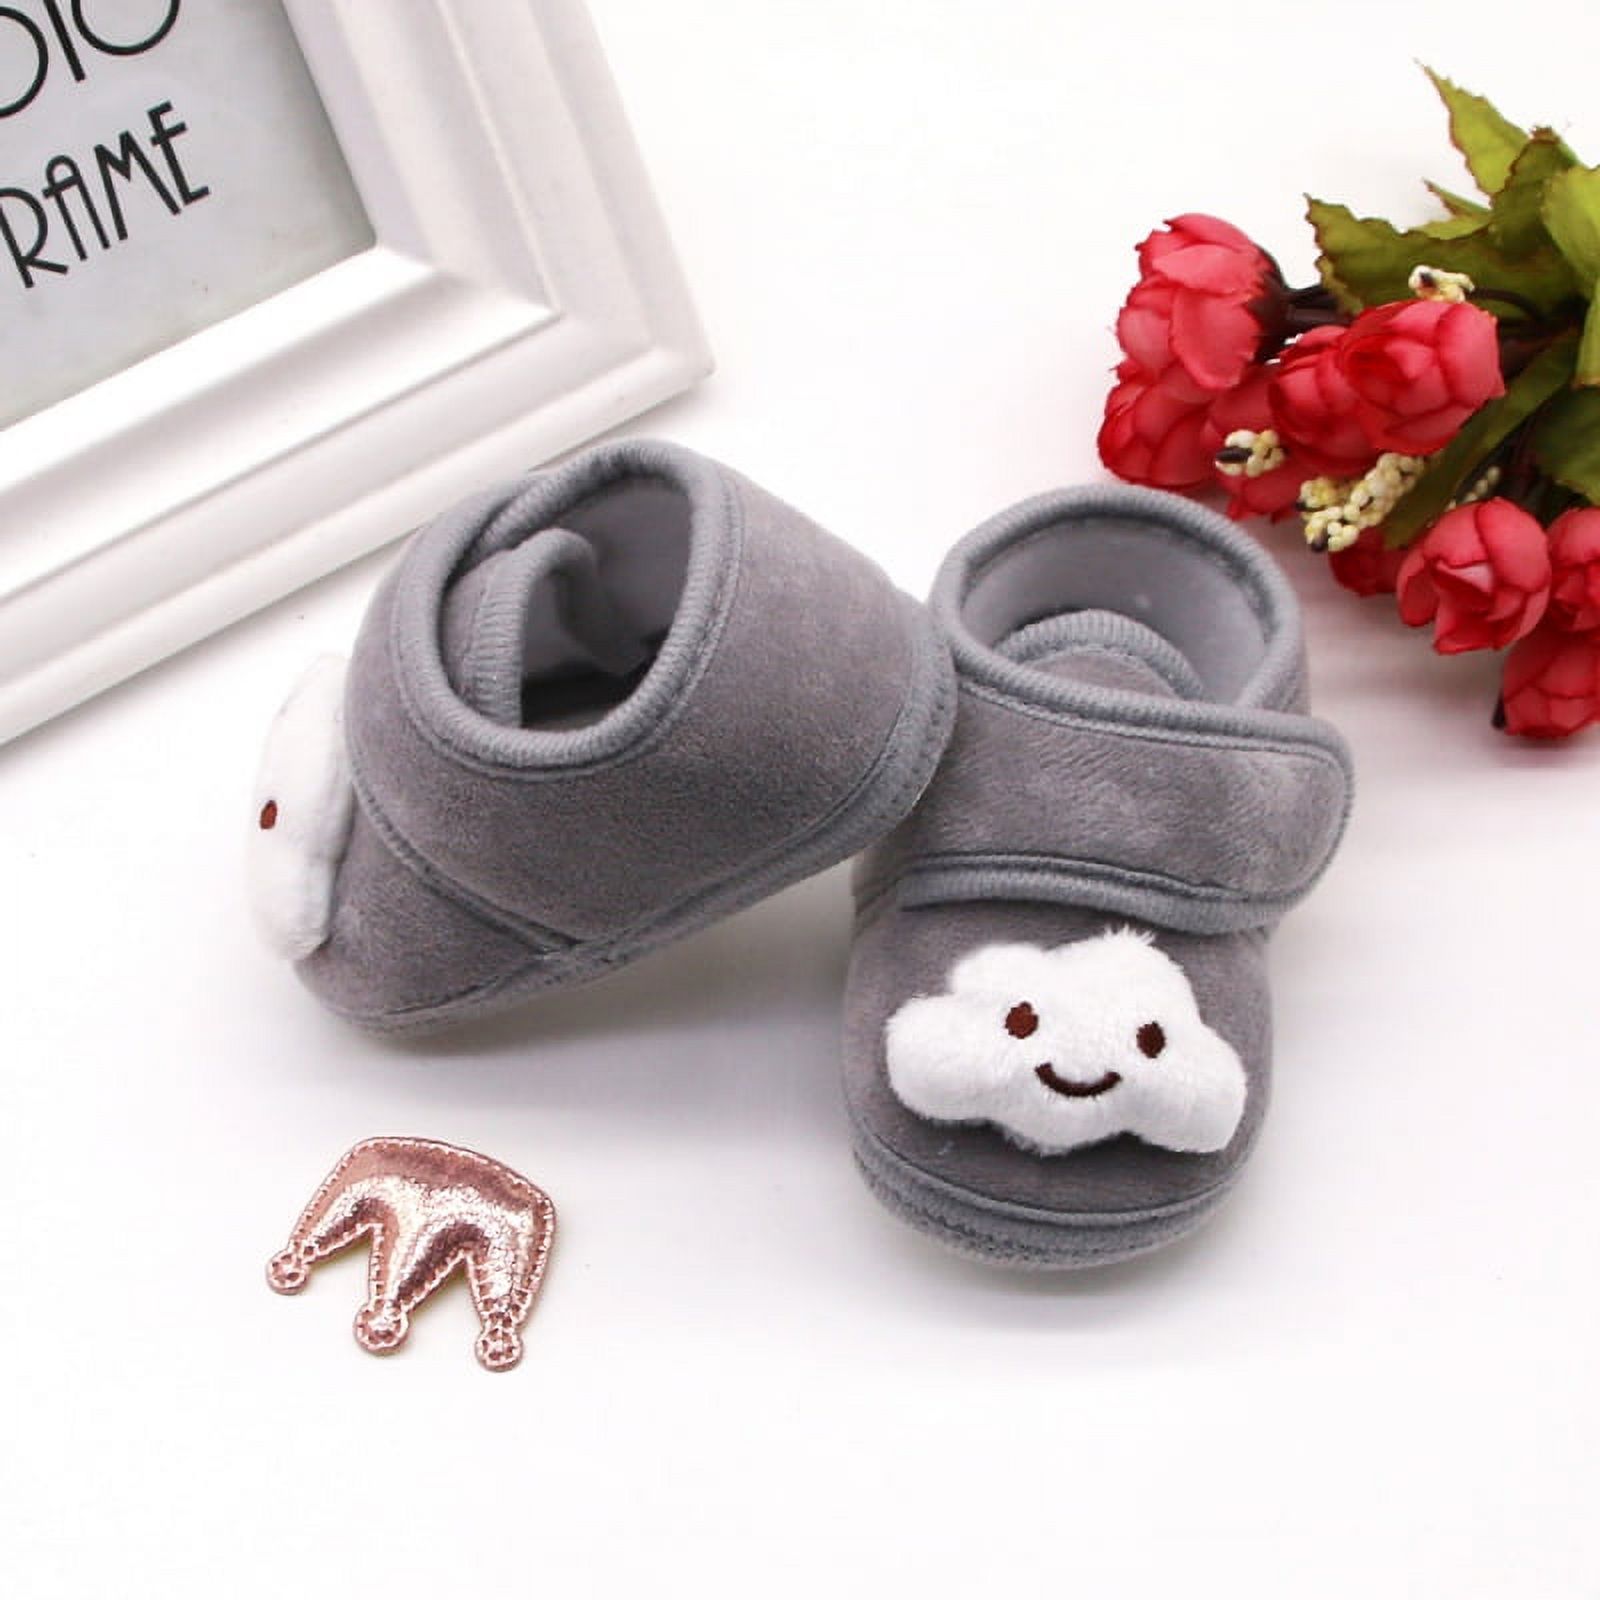 Infant Baby Boys Girls Slipper Soft Sole Non Skid Sneaker Moccasins Toddler First Walker Crib House Shoes - image 4 of 7